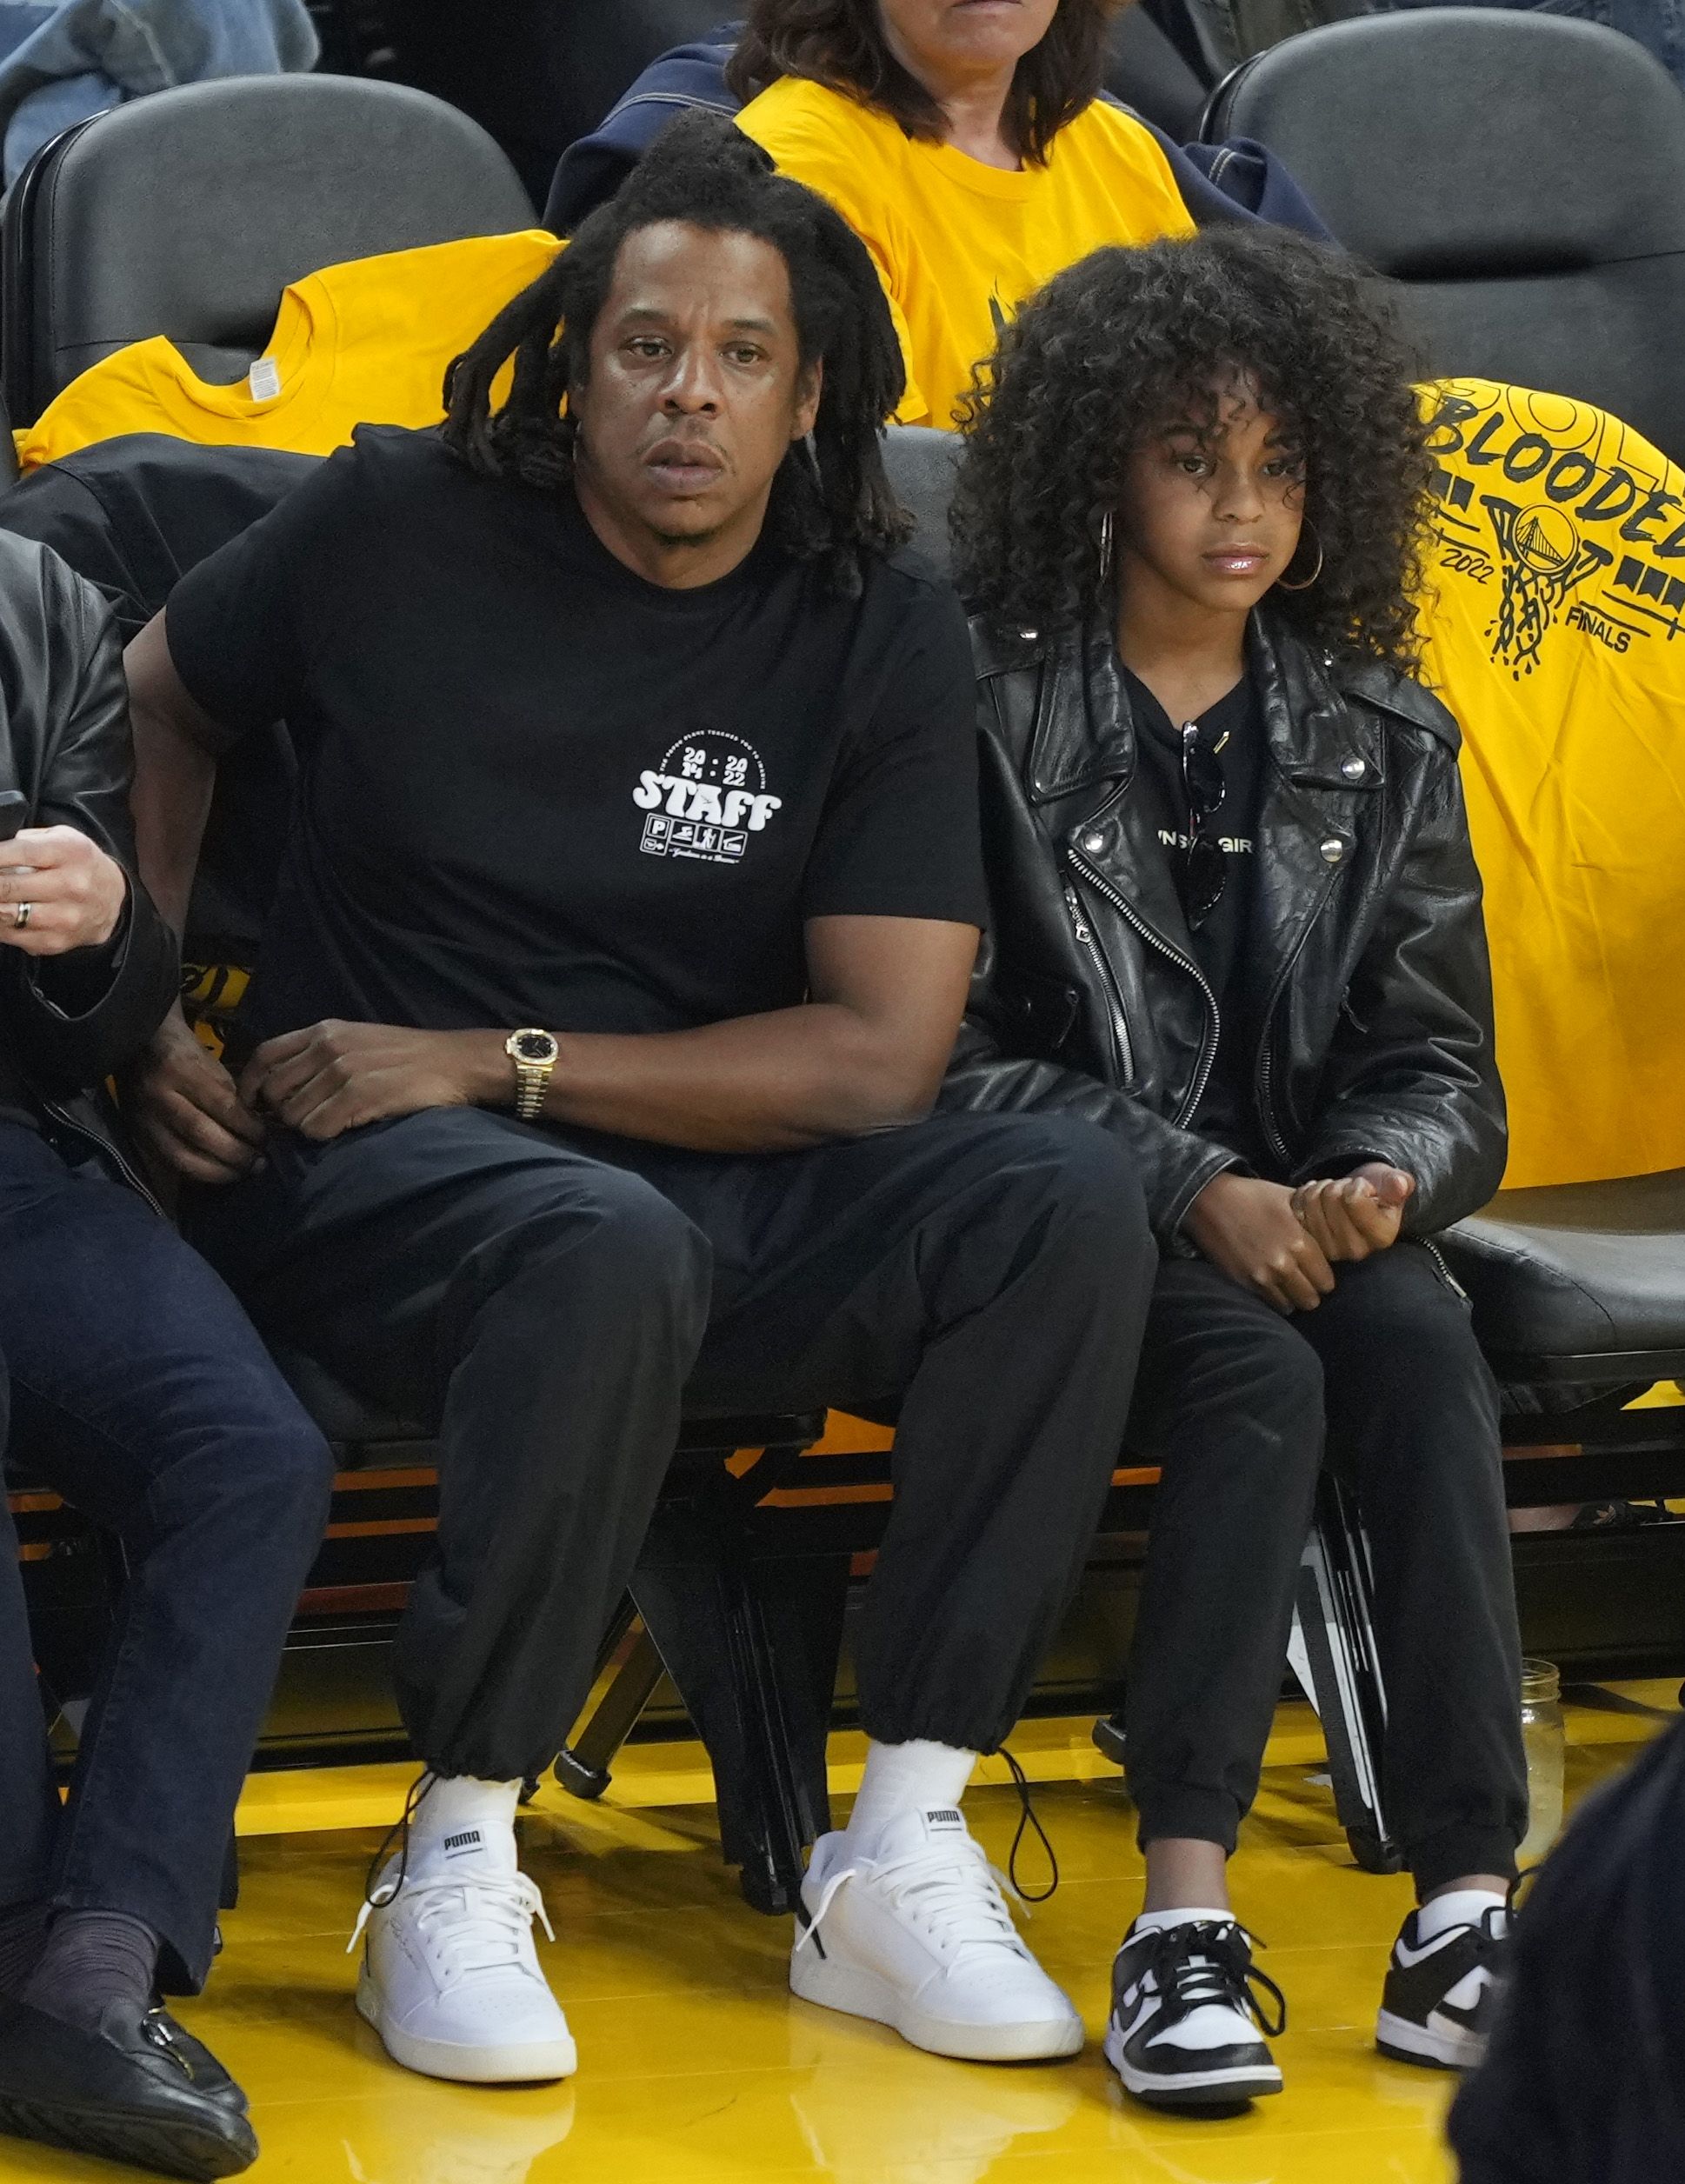 Jay-Z Gives Daughter Blue Ivy a Kiss on the Cheek at the NBA Finals